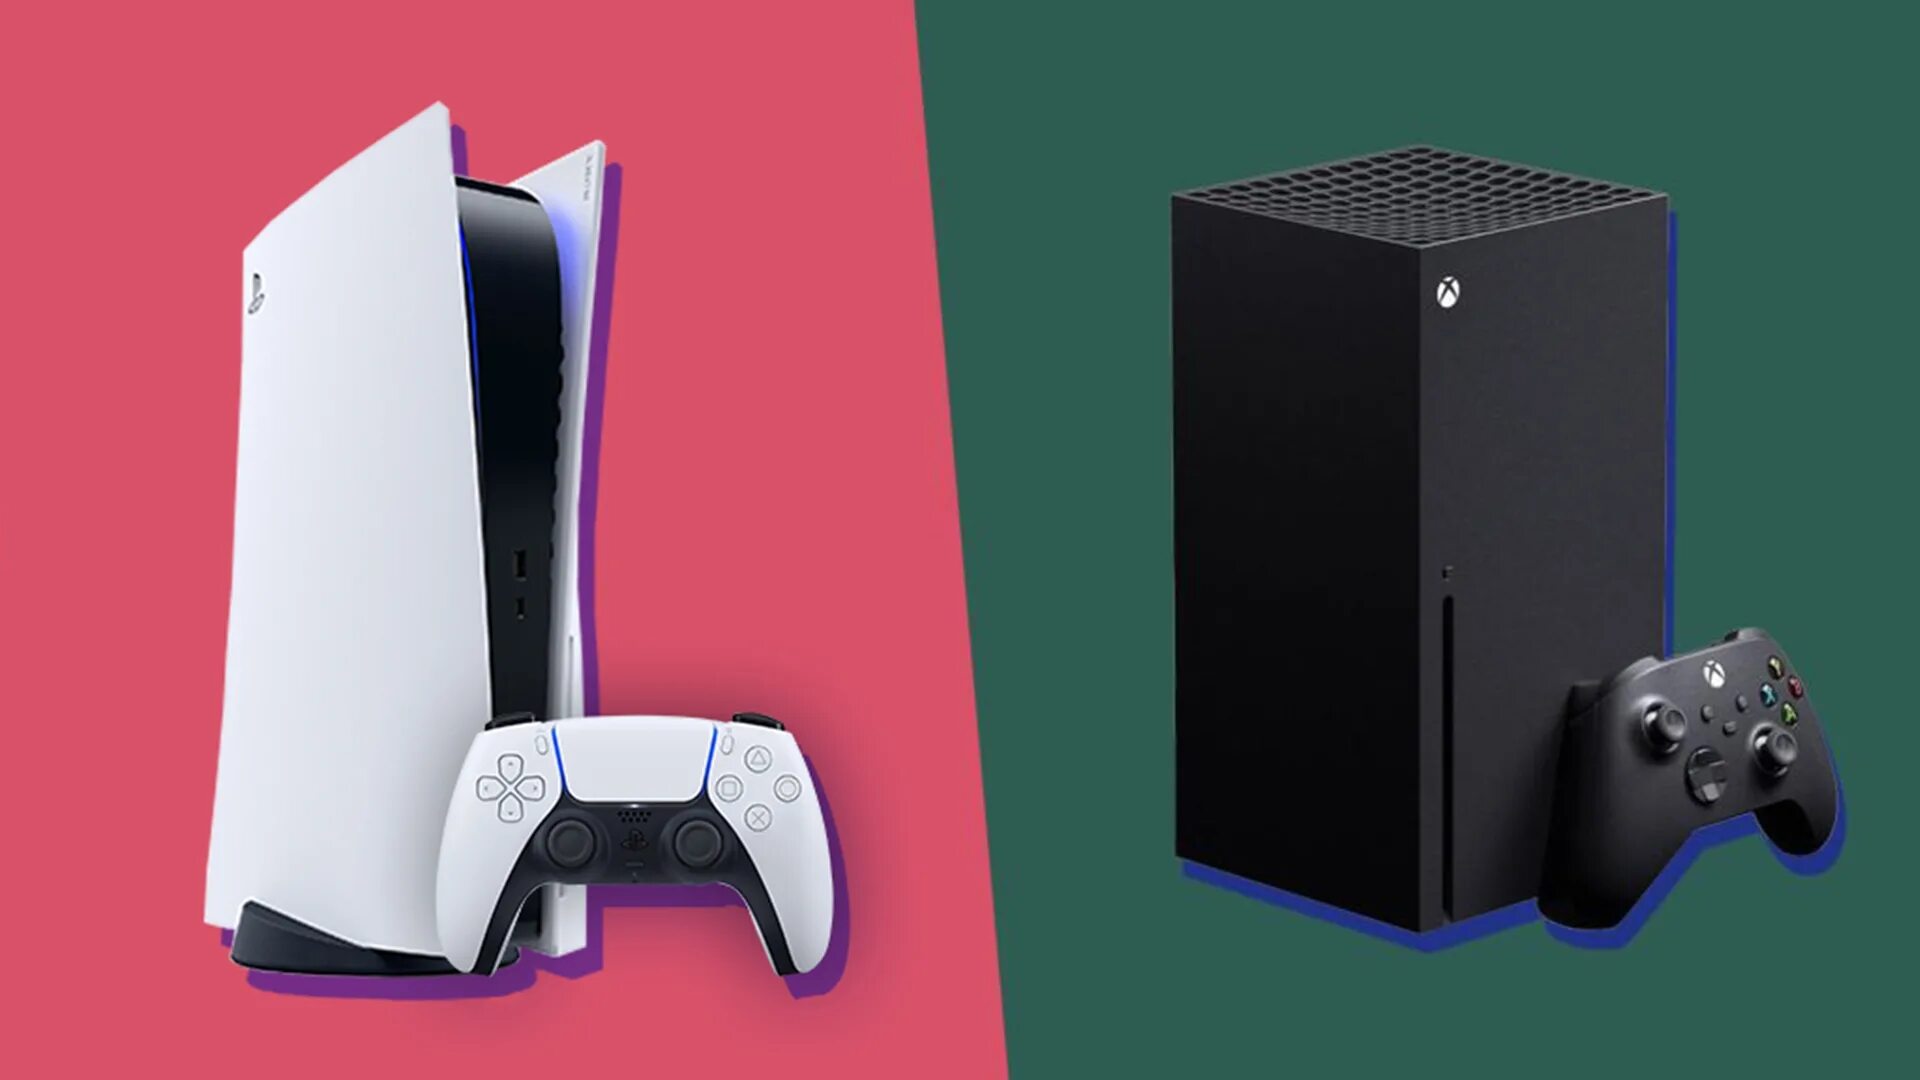 Ps5 Xbox Series x. PLAYSTATION 5 Xbox Series x. PLAYSTATION 5 vs Xbox Series x. Xbox vs ps5. Профиль ps5